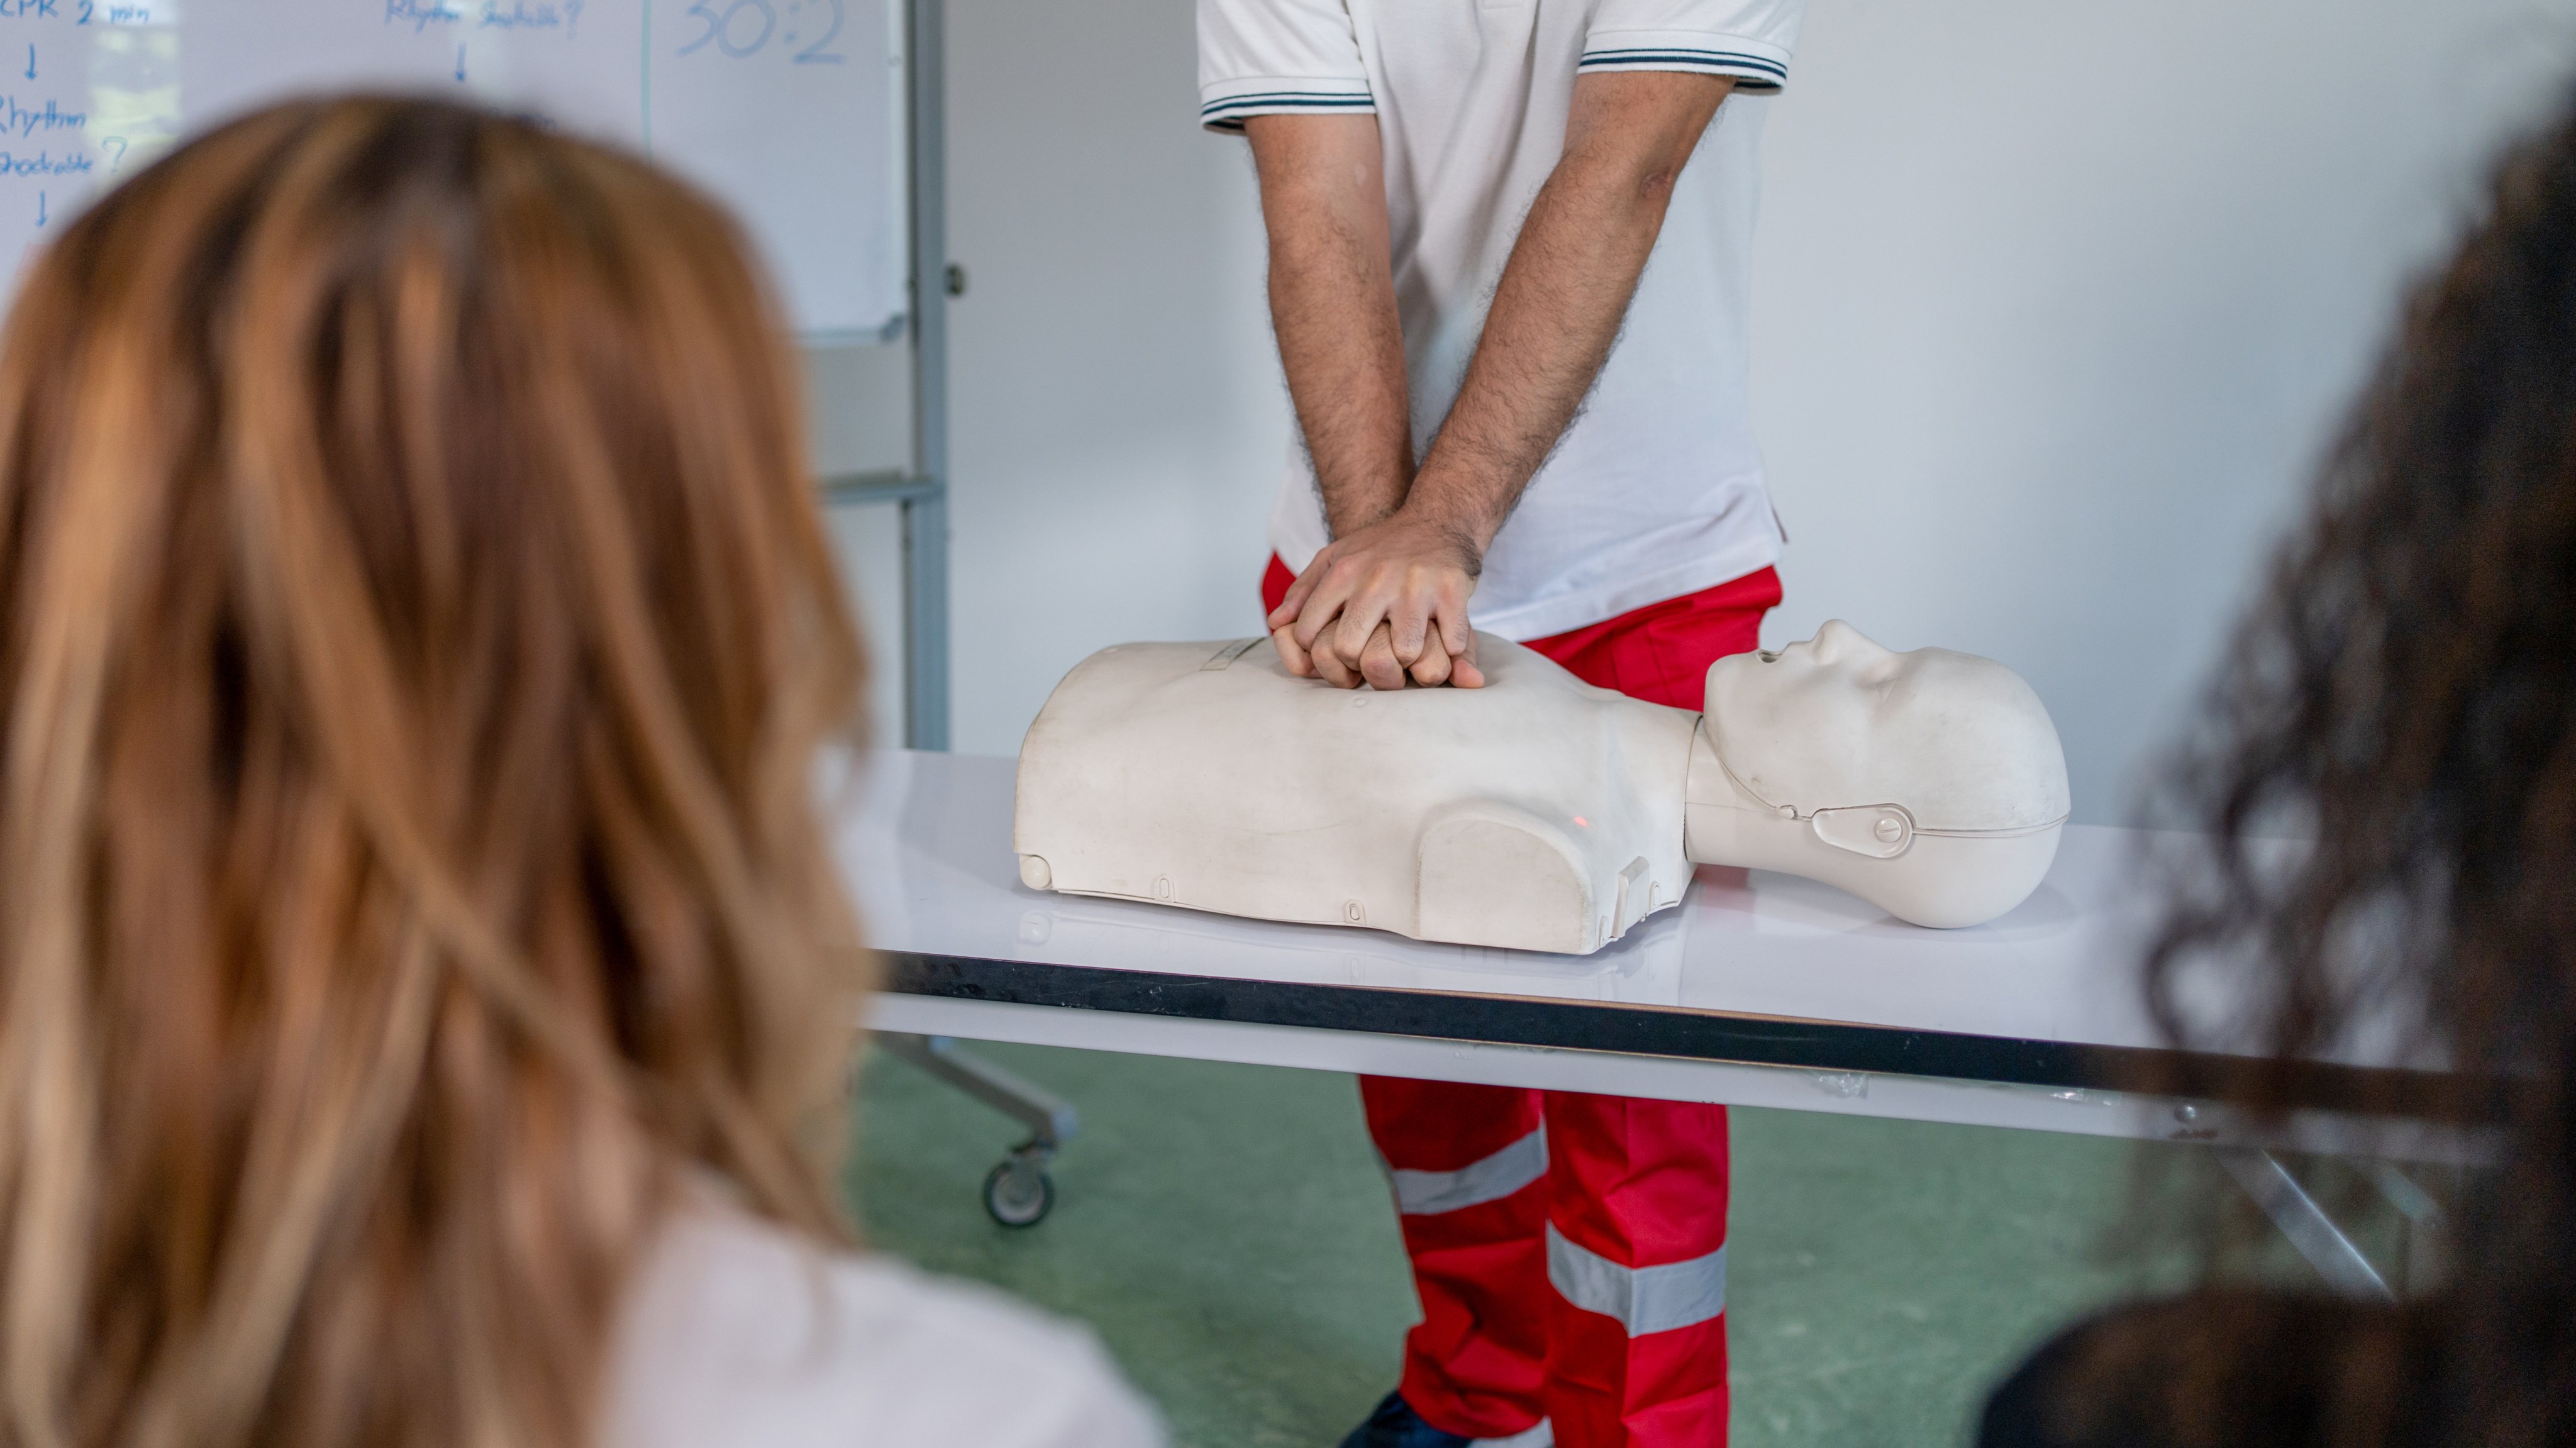 In the First-aid class, practice chest compressions on a CPR training dummy.